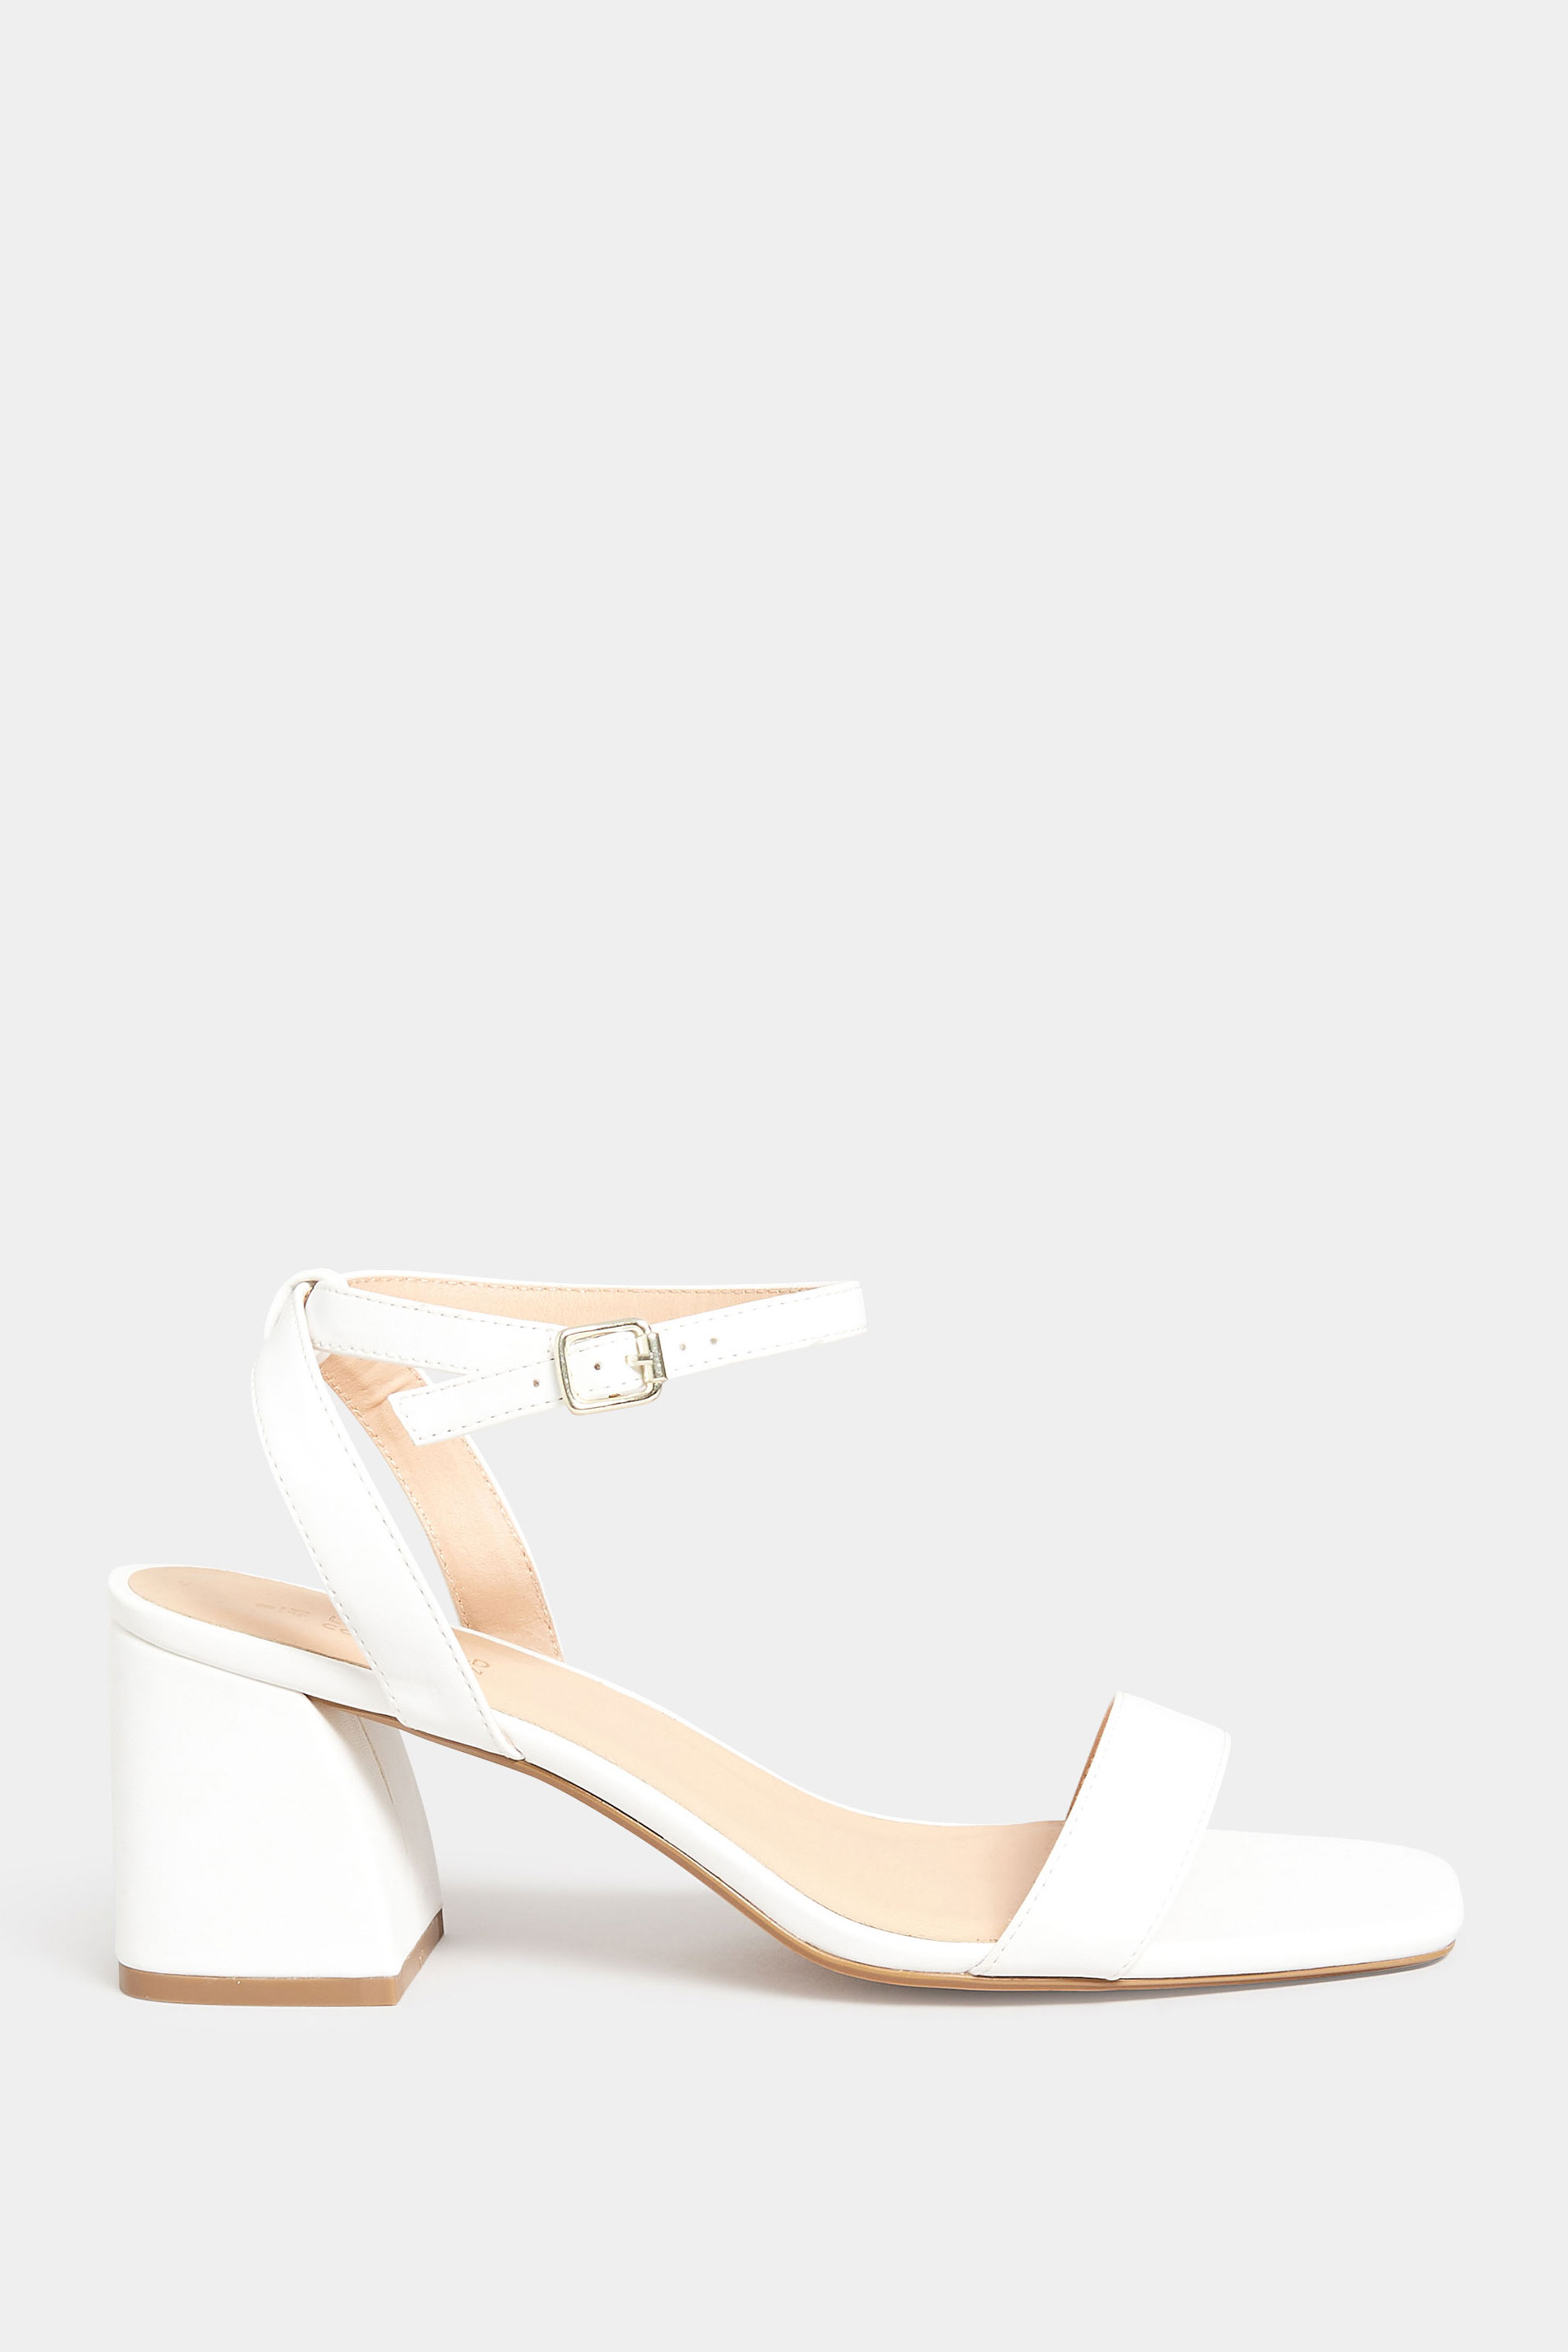 LIMITED COLLECTION White Block Heel Sandals In Wide E Fit & Extra Wide EEE Fit| Yours Clothing 3